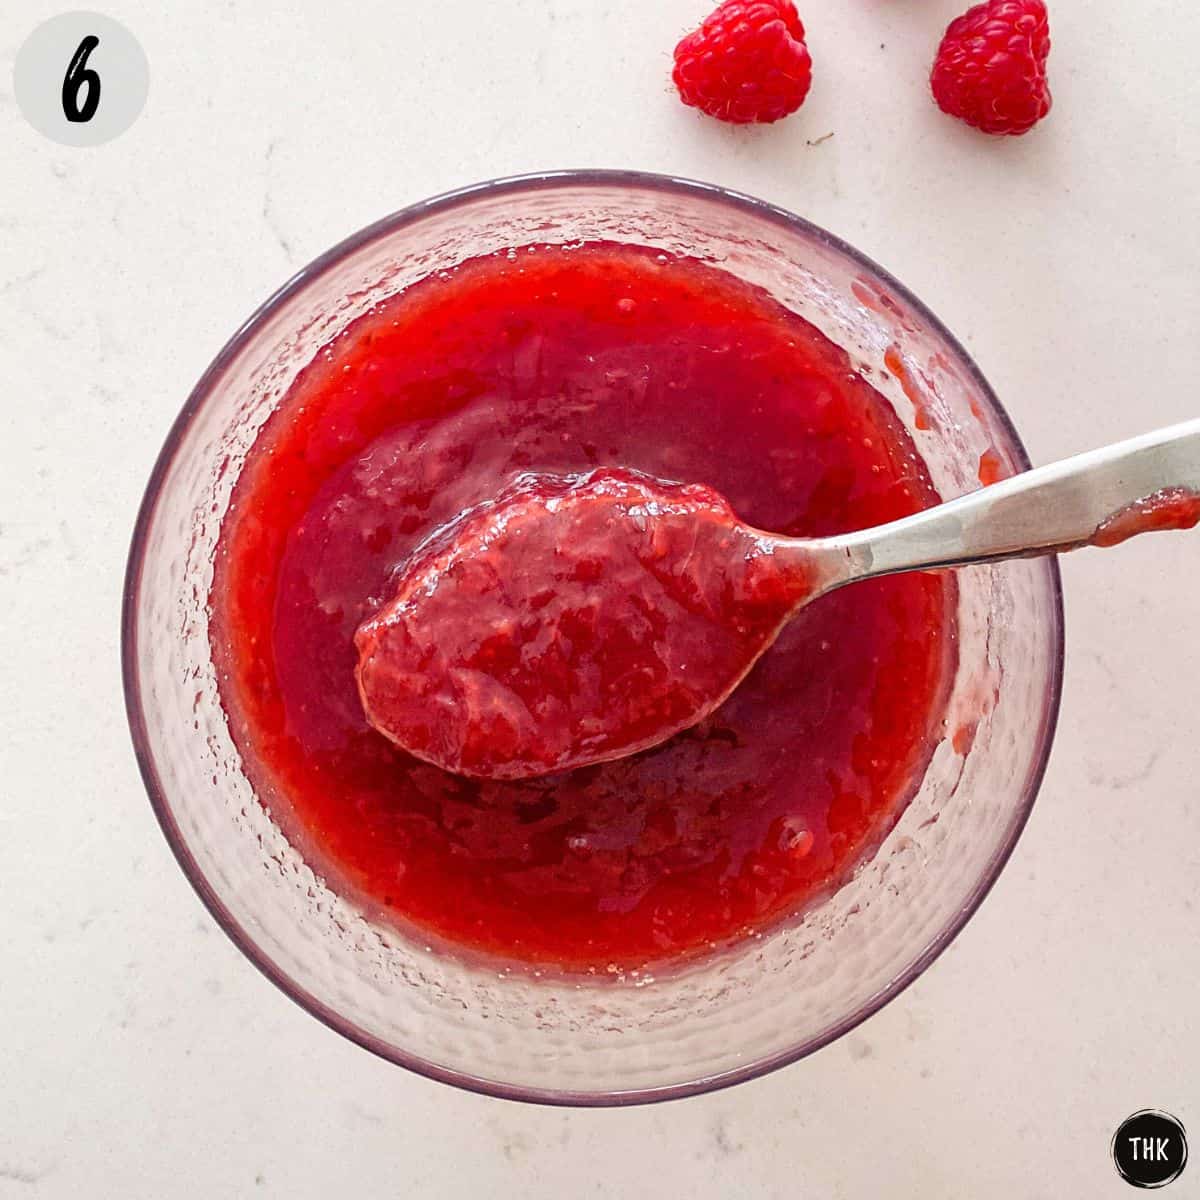 Raspberry puree inside small glass bowl with spoon on top.